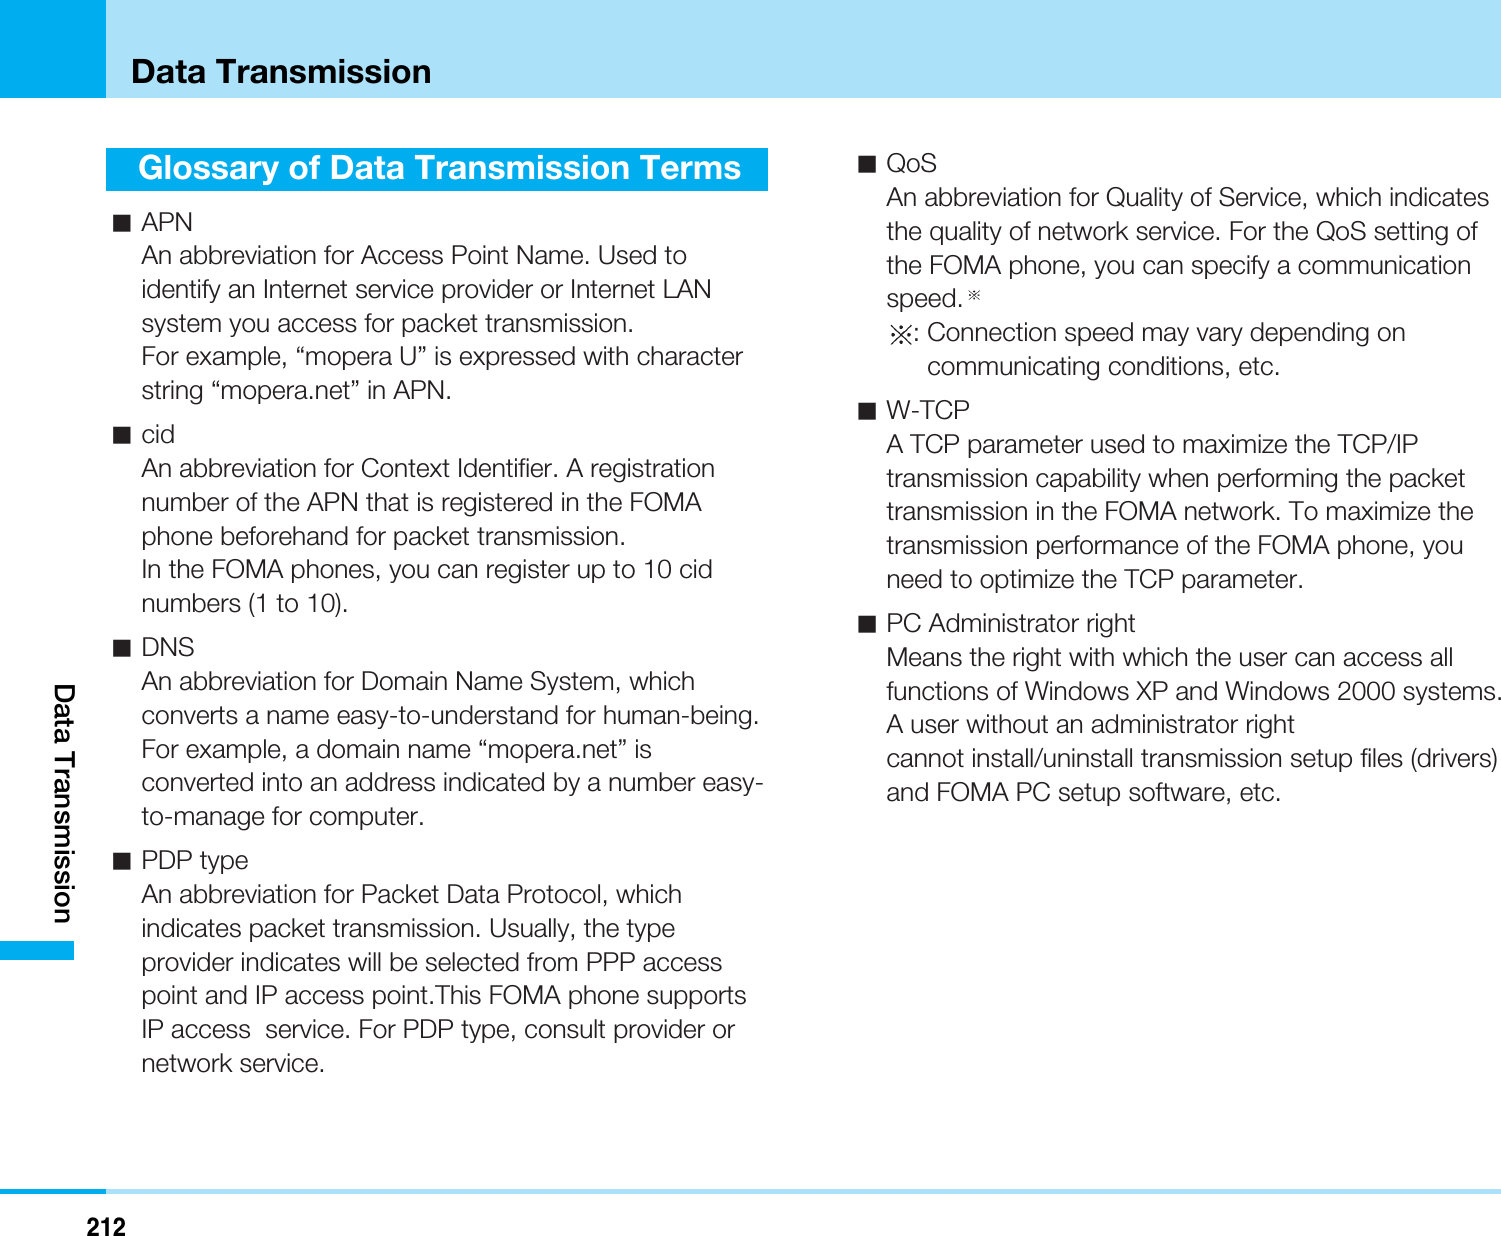 212Data TransmissionGlossary of Data Transmission TermsaAPNAn abbreviation for Access Point Name. Used toidentify an Internet service provider or Internet LANsystem you access for packet transmission.For example, “mopera U” is expressed with characterstring “mopera.net” in APN.acidAn abbreviation for Context Identifier. A registrationnumber of the APN that is registered in the FOMAphone beforehand for packet transmission.In the FOMA phones, you can register up to 10 cidnumbers (1 to 10).aDNSAn abbreviation for Domain Name System, whichconverts a name easy-to-understand for human-being.For example, a domain name “mopera.net” isconverted into an address indicated by a number easy-to-manage for computer.aPDP typeAn abbreviation for Packet Data Protocol, whichindicates packet transmission. Usually, the typeprovider indicates will be selected from PPP accesspoint and IP access point.This FOMA phone supportsIP access  service. For PDP type, consult provider ornetwork service.aQoSAn abbreviation for Quality of Service, which indicatesthe quality of network service. For the QoS setting ofthe FOMA phone, you can specify a communicationspeed.: Connection speed may vary depending oncommunicating conditions, etc.aW-TCPA TCP parameter used to maximize the TCP/IPtransmission capability when performing the packettransmission in the FOMA network. To maximize thetransmission performance of the FOMA phone, youneed to optimize the TCP parameter.aPC Administrator rightMeans the right with which the user can access allfunctions of Windows XP and Windows 2000 systems.A user without an administrator rightcannot install/uninstall transmission setup files (drivers)and FOMA PC setup software, etc.Data Transmission